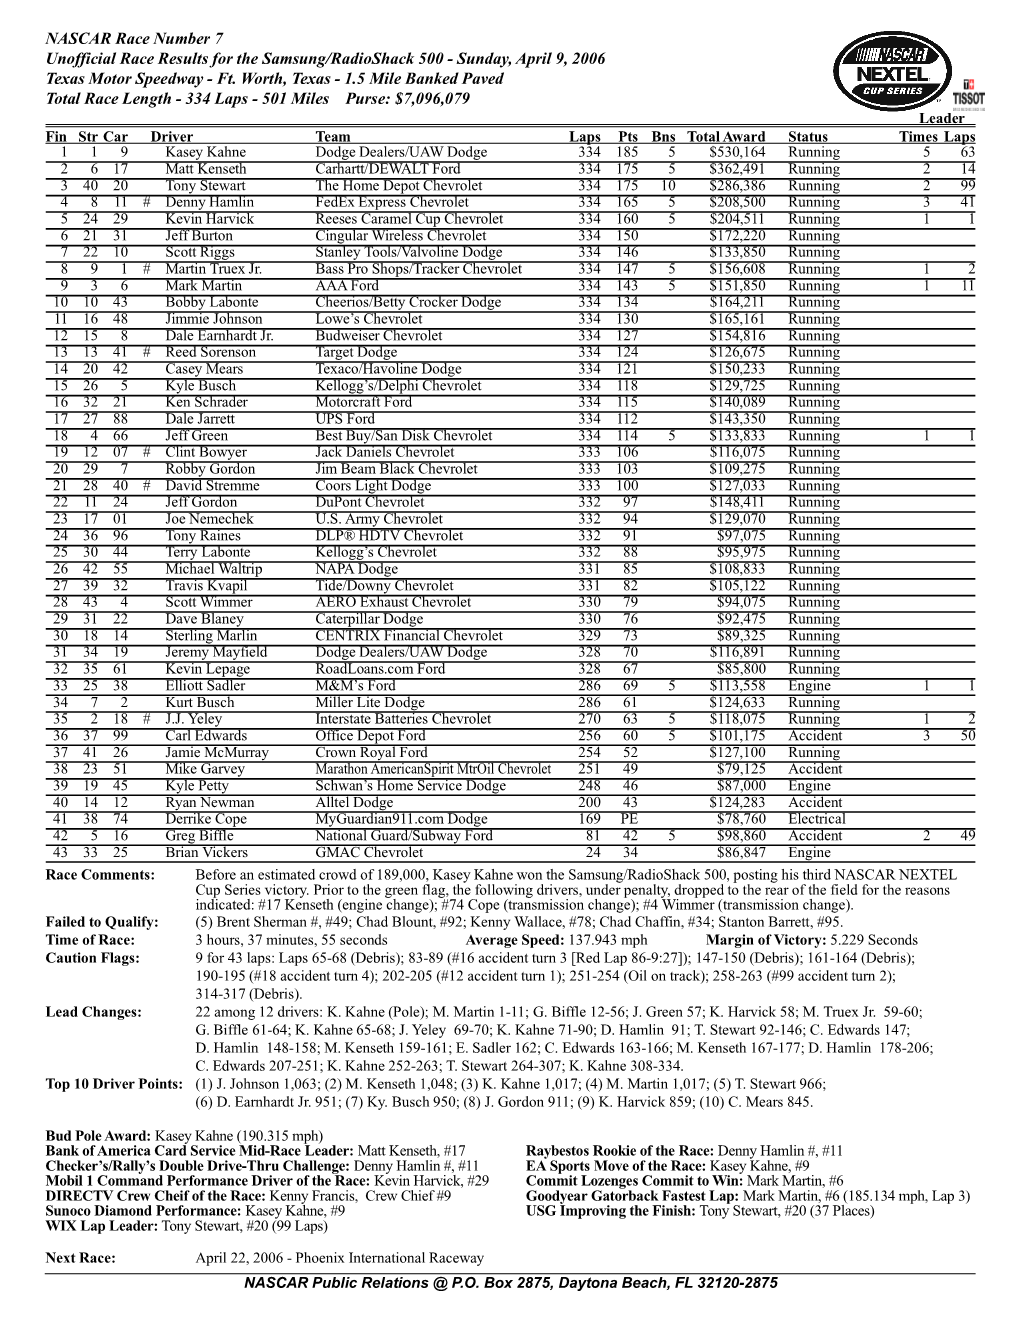 NASCAR Race Number 7 Unofficial Race Results for the Samsung/Radioshack 500 - Sunday, April 9, 2006 Texas Motor Speedway - Ft